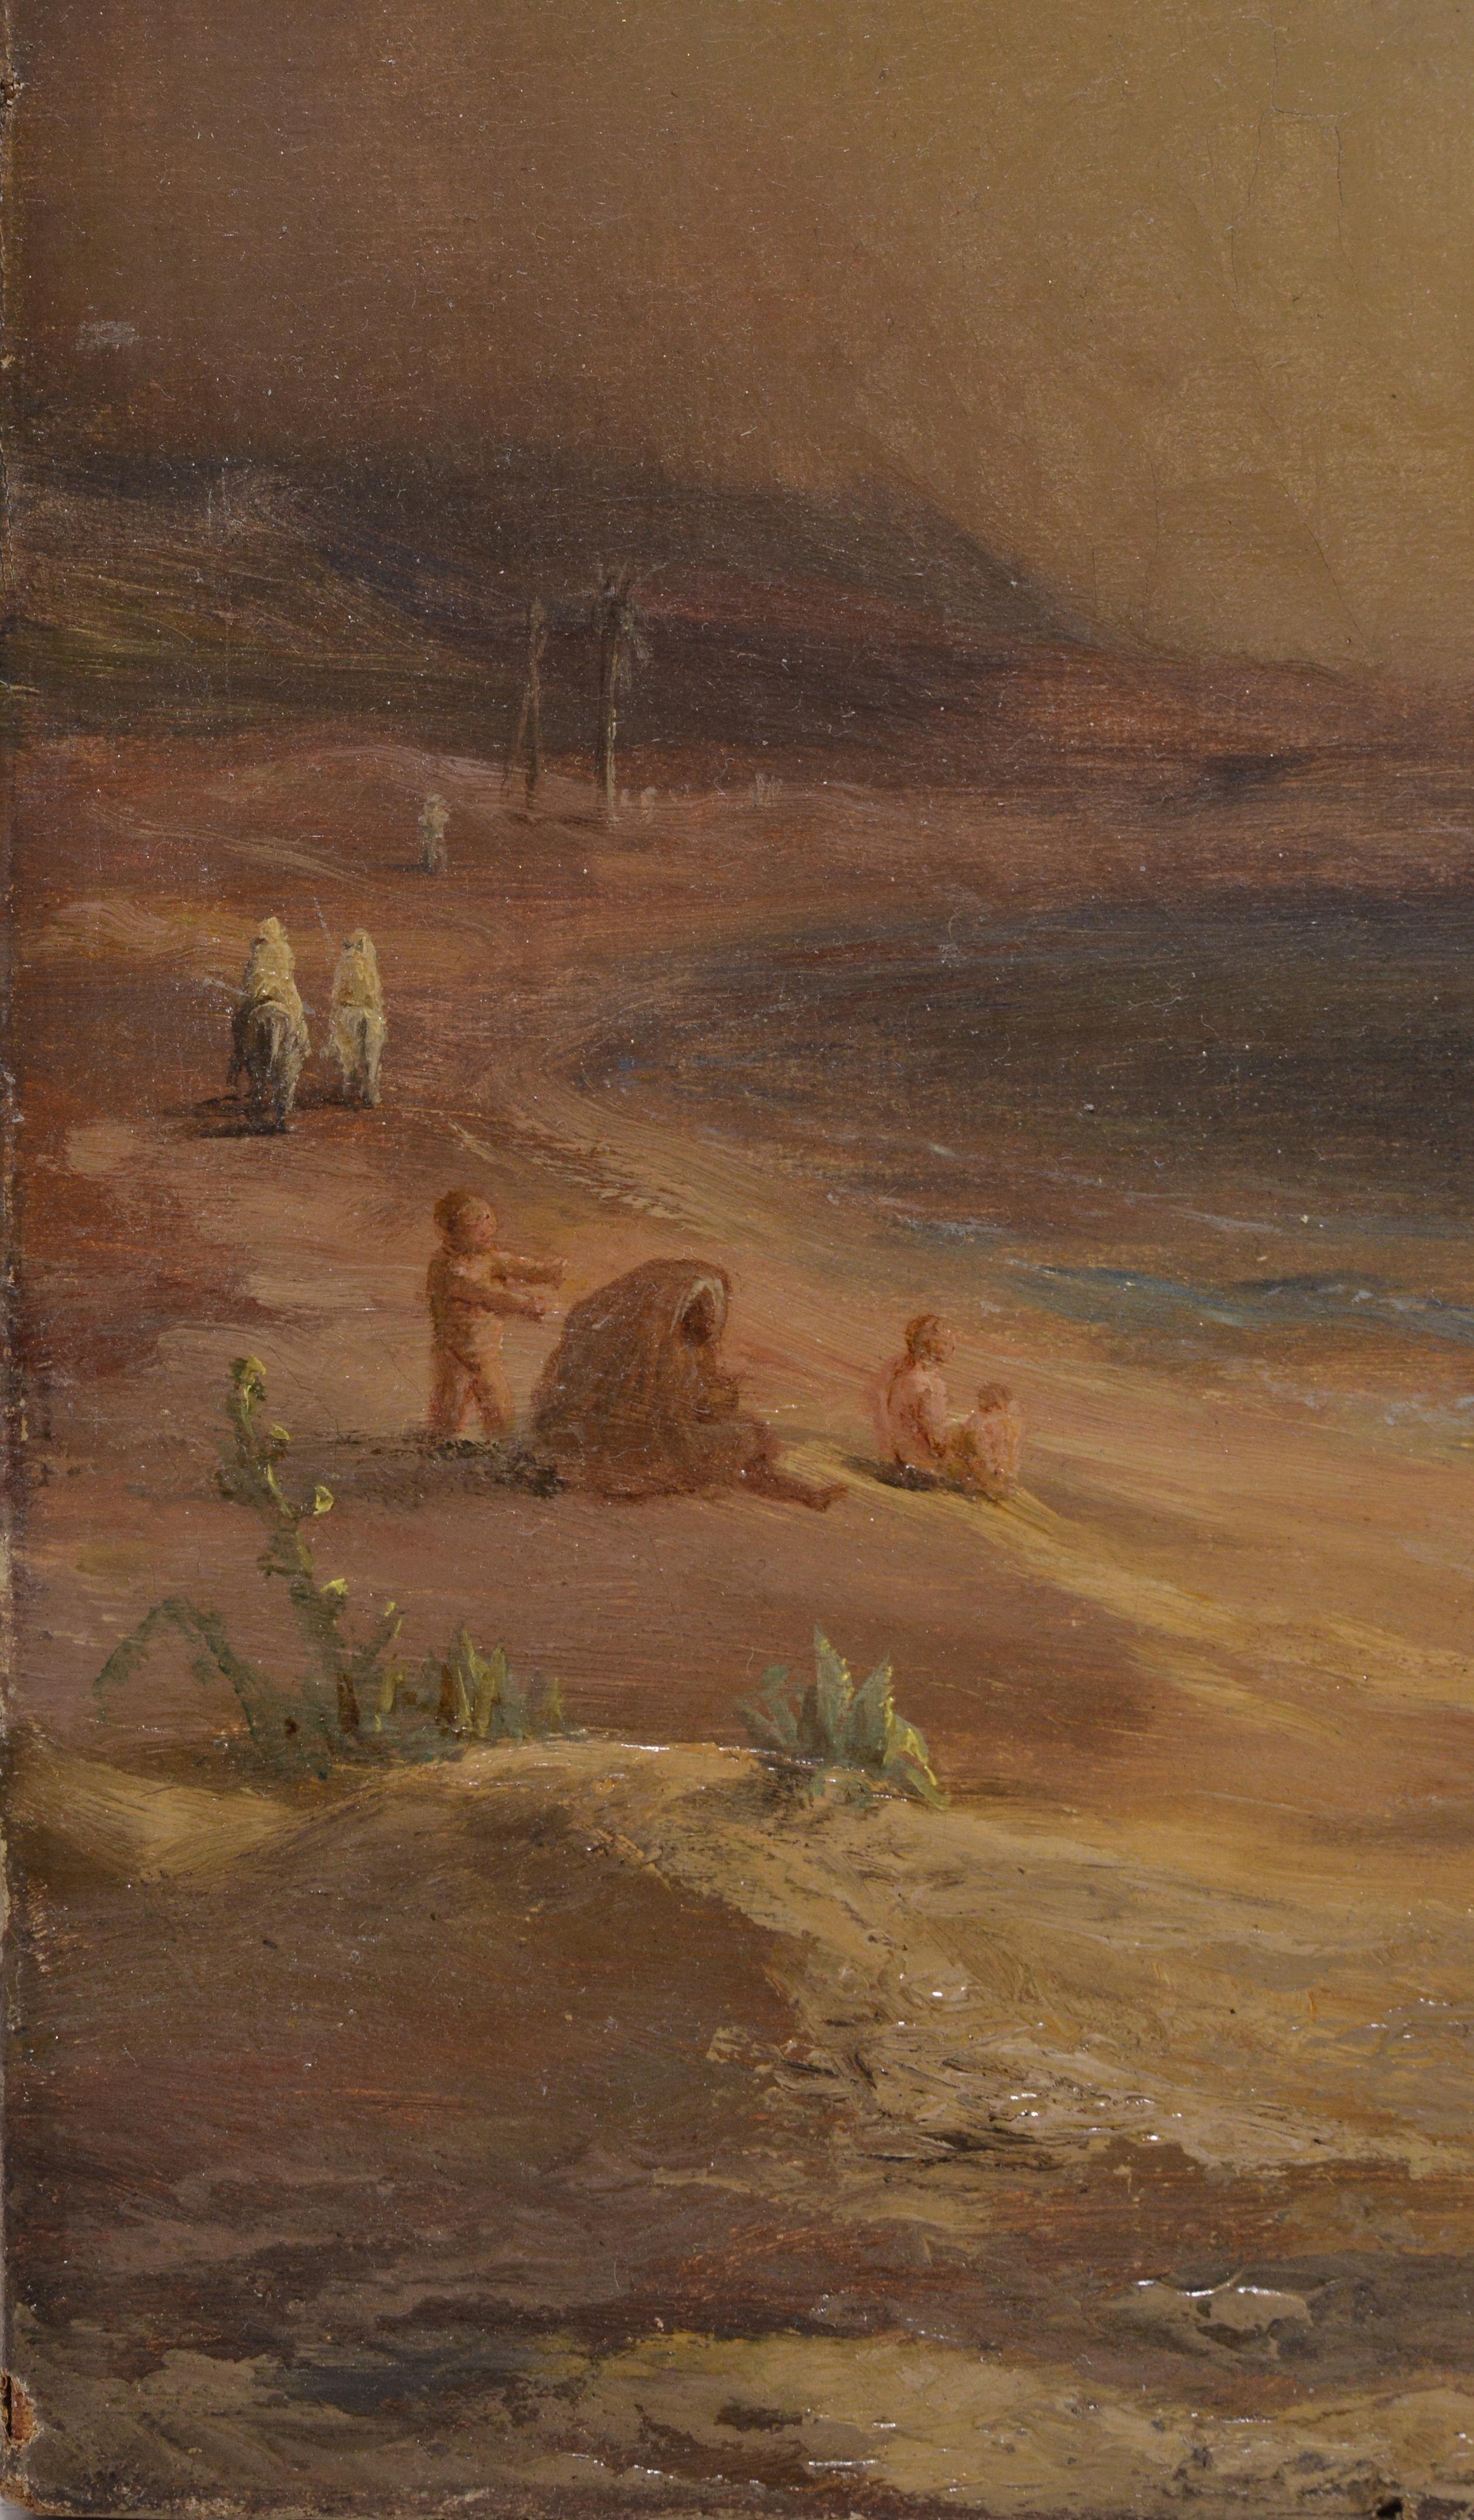 Smugglers at Algerian Coast 1871 Sunset Marine Scene Oil Painting by T. Gudin For Sale 2